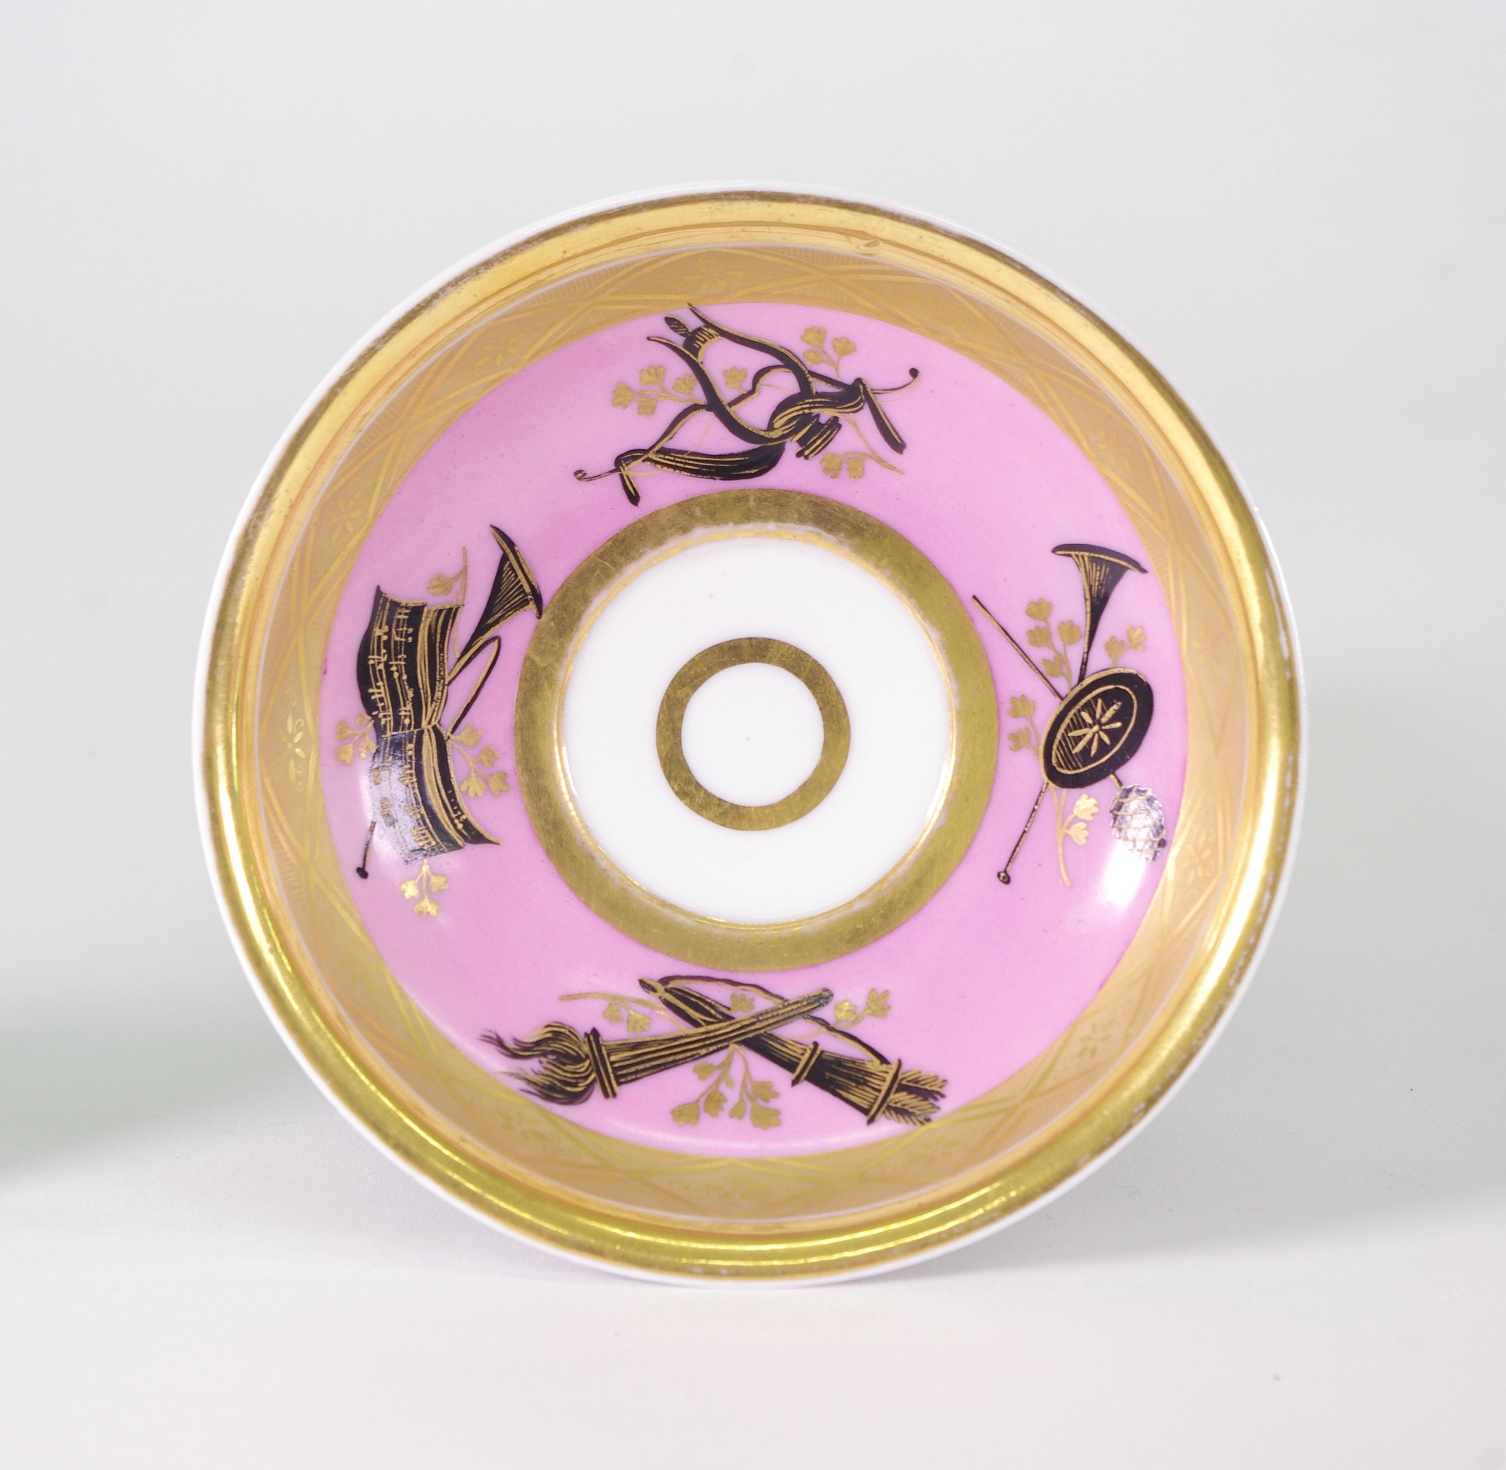 Popov Cup and Saucer, c. 1820